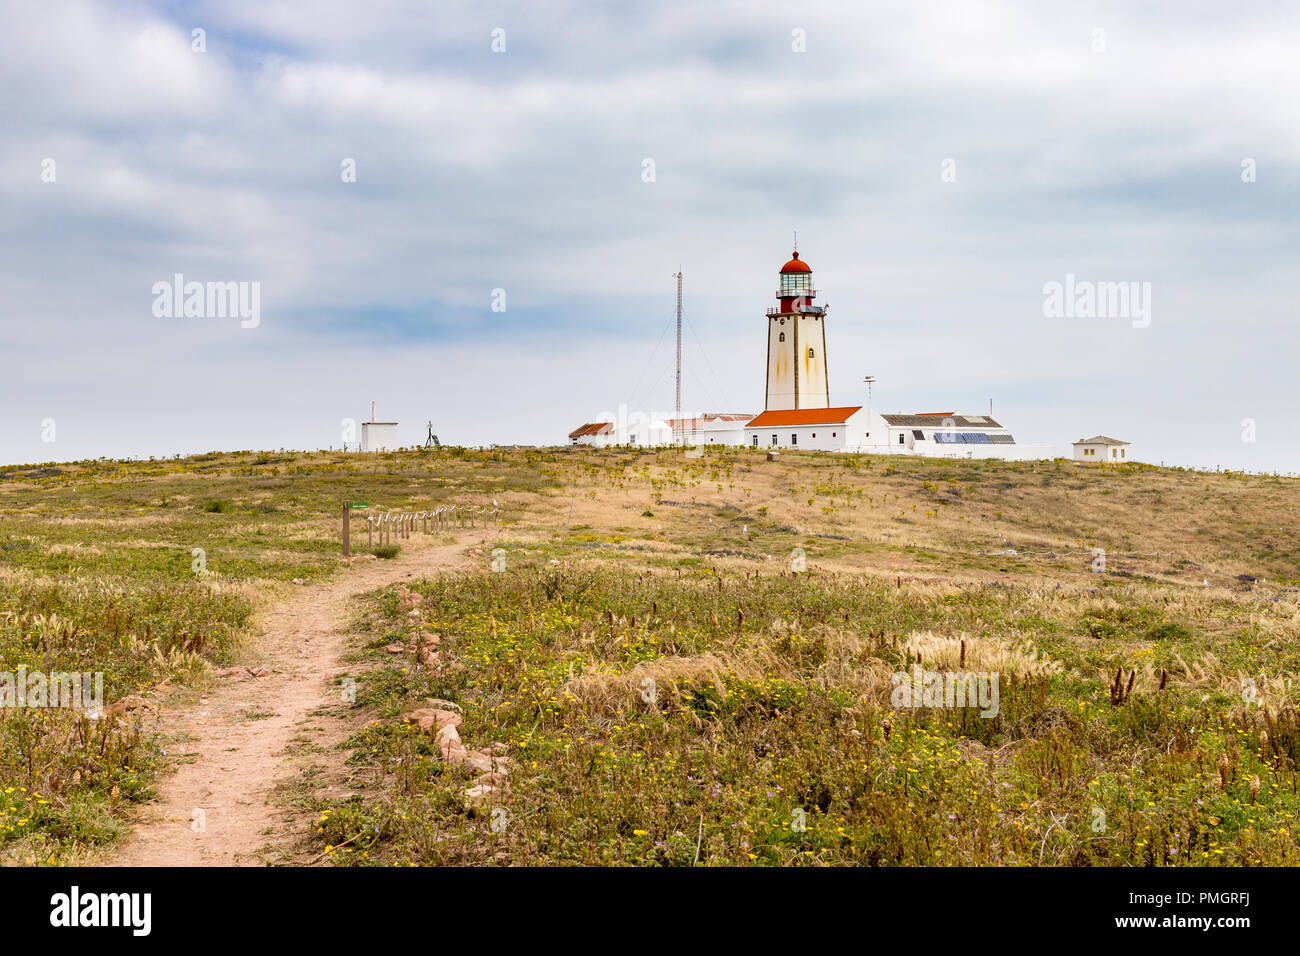 Berlengas Islands, Portugal - May 21, 2018: Lighthouse on top of the Berlengas nature reserve Stock Photo